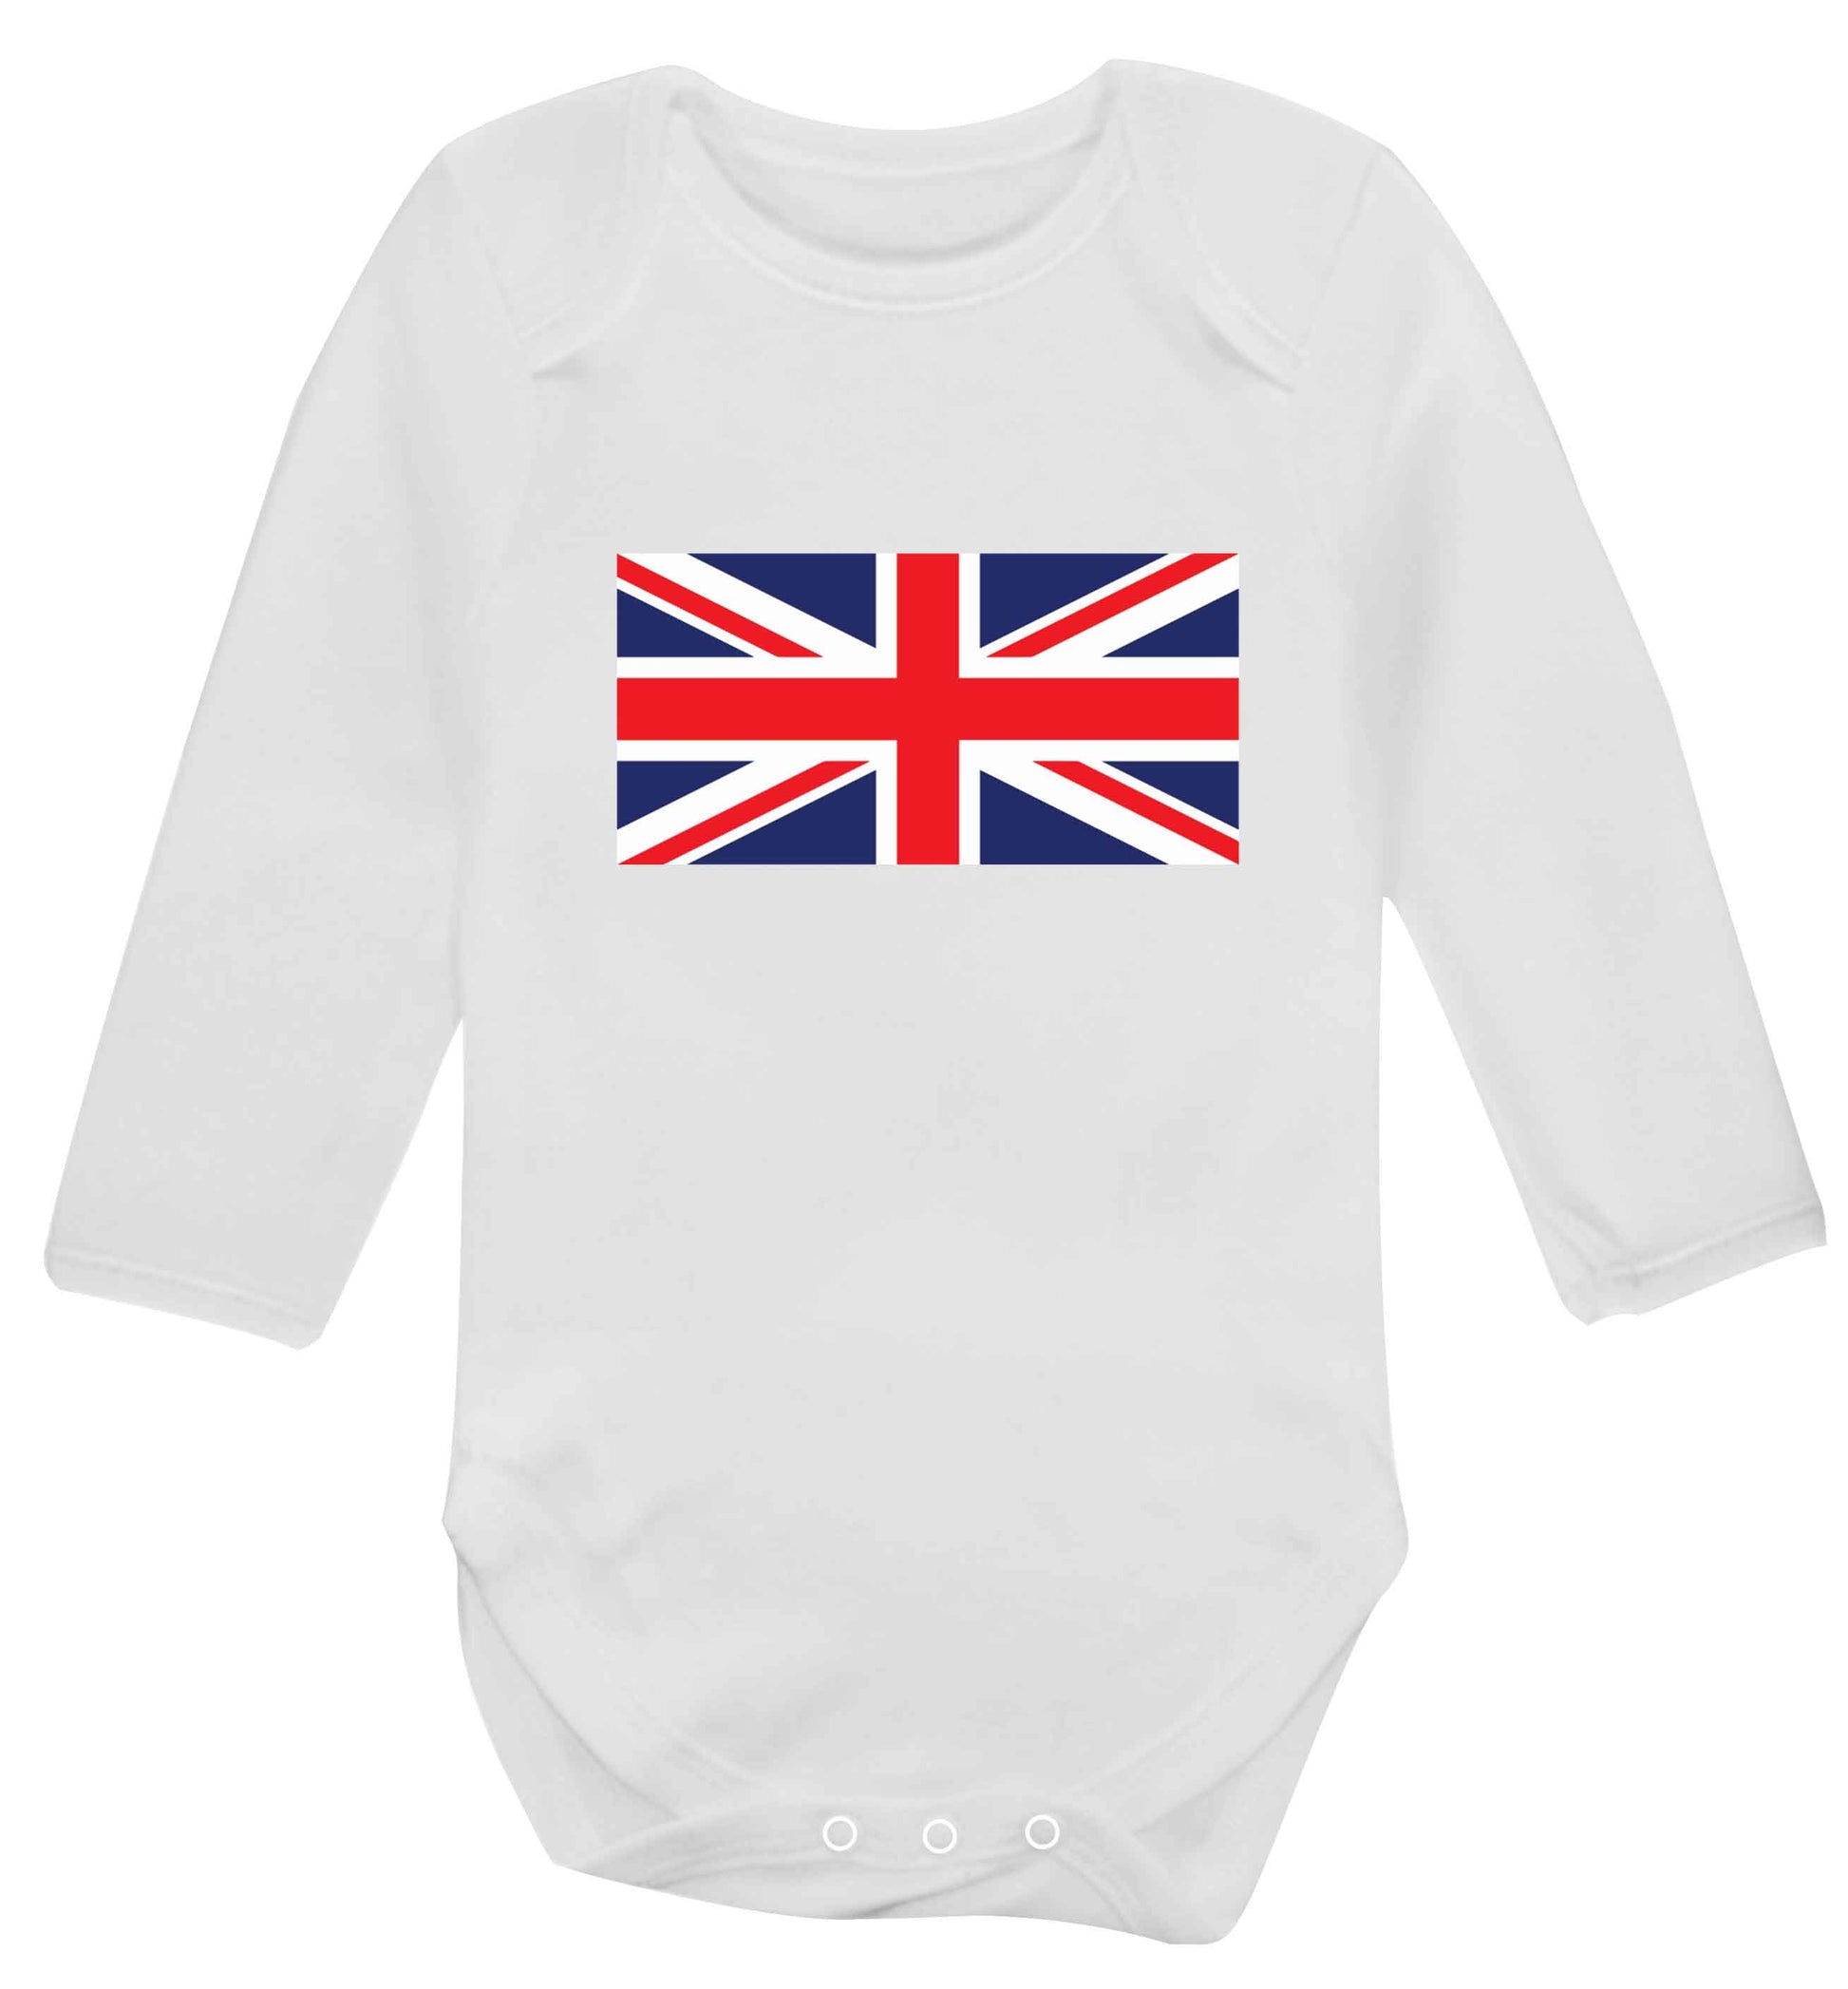 Union Jack baby vest long sleeved white 6-12 months